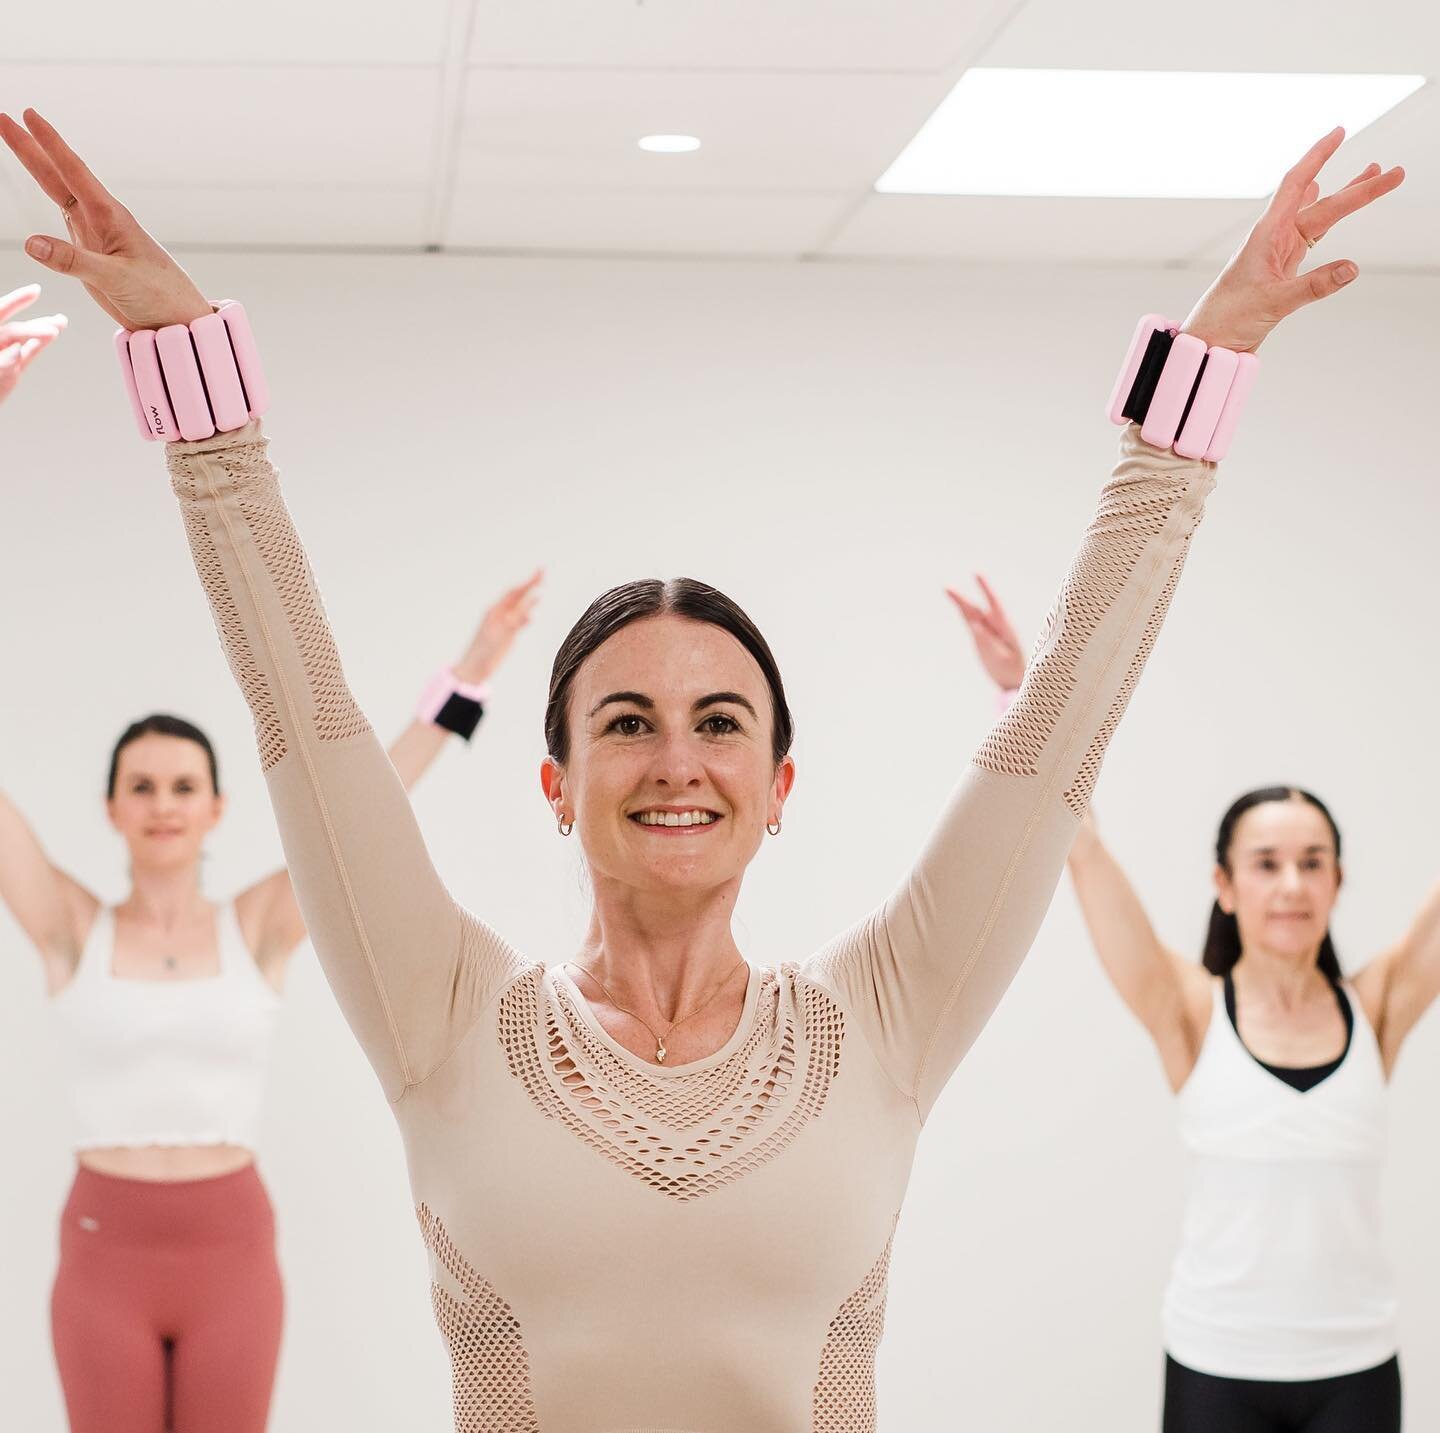 What is @boutiqueballetpilates Ballet Centred class?? 🩰

Our Ballet Centred class is a fun ballet-inspired fitness (cardio and toning) class to upbeat music. 

The class includes repetitive basic ballet steps, port de bras (arm movements), stretches